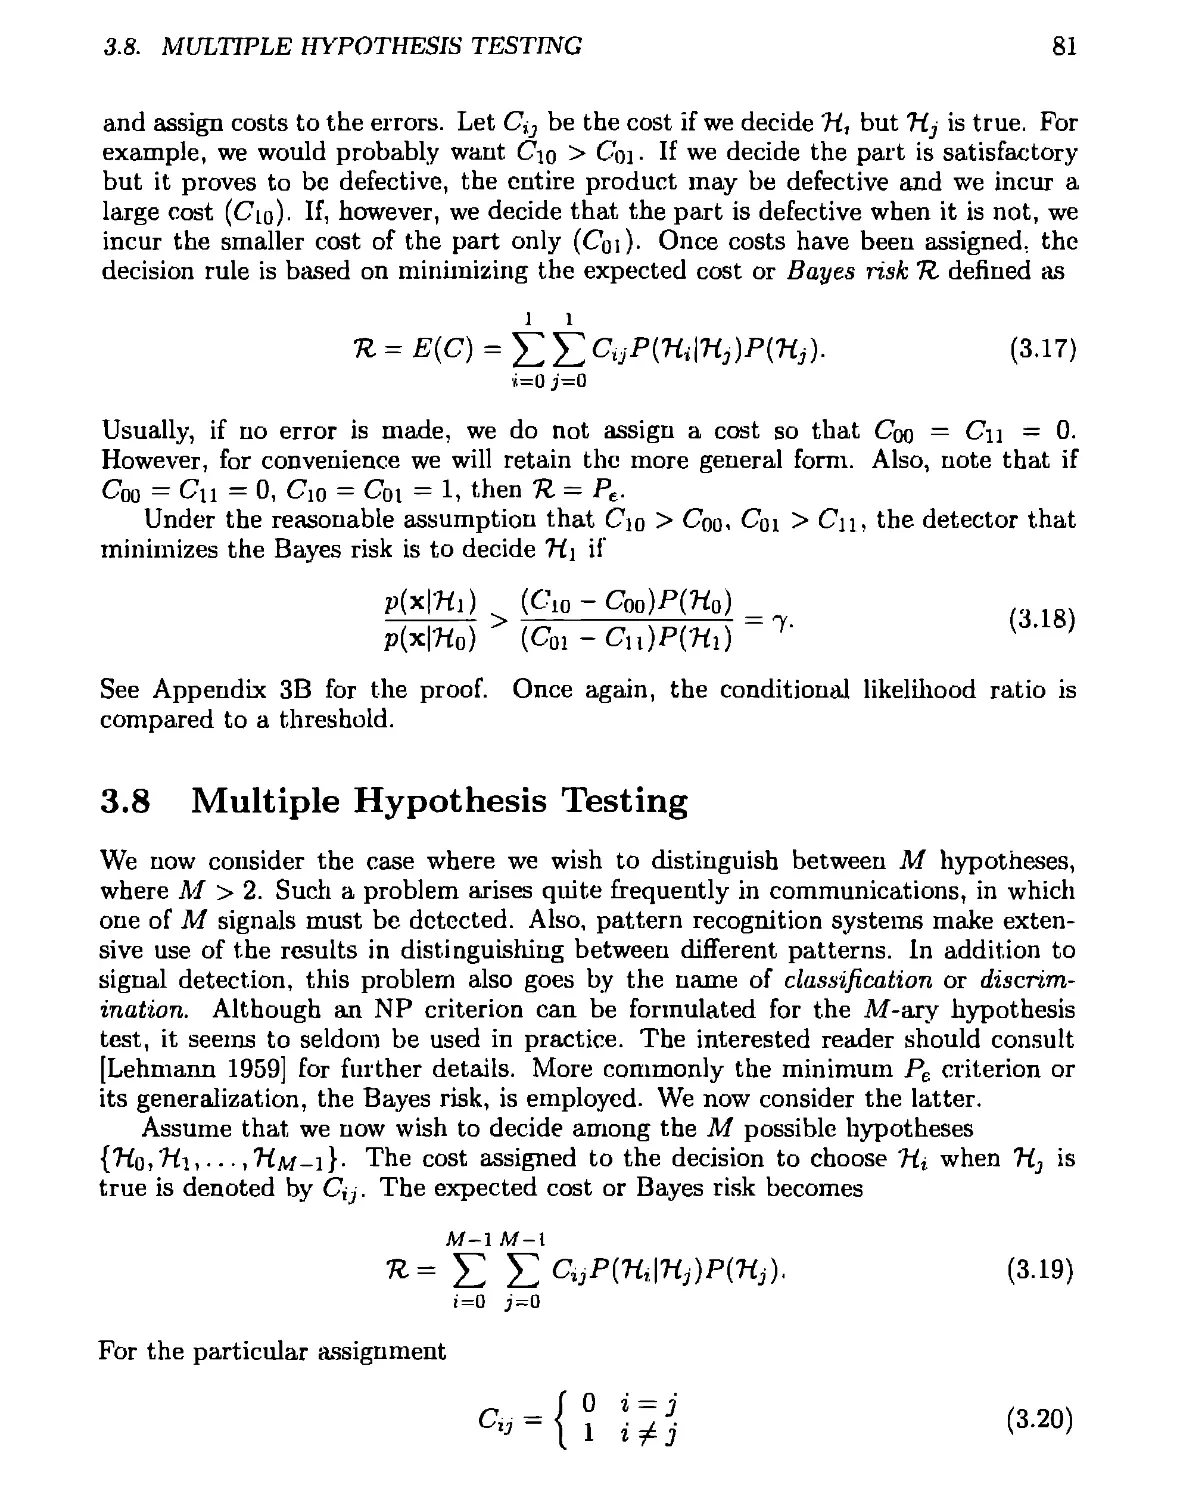 3.8 Multiple Hypothesis Testing